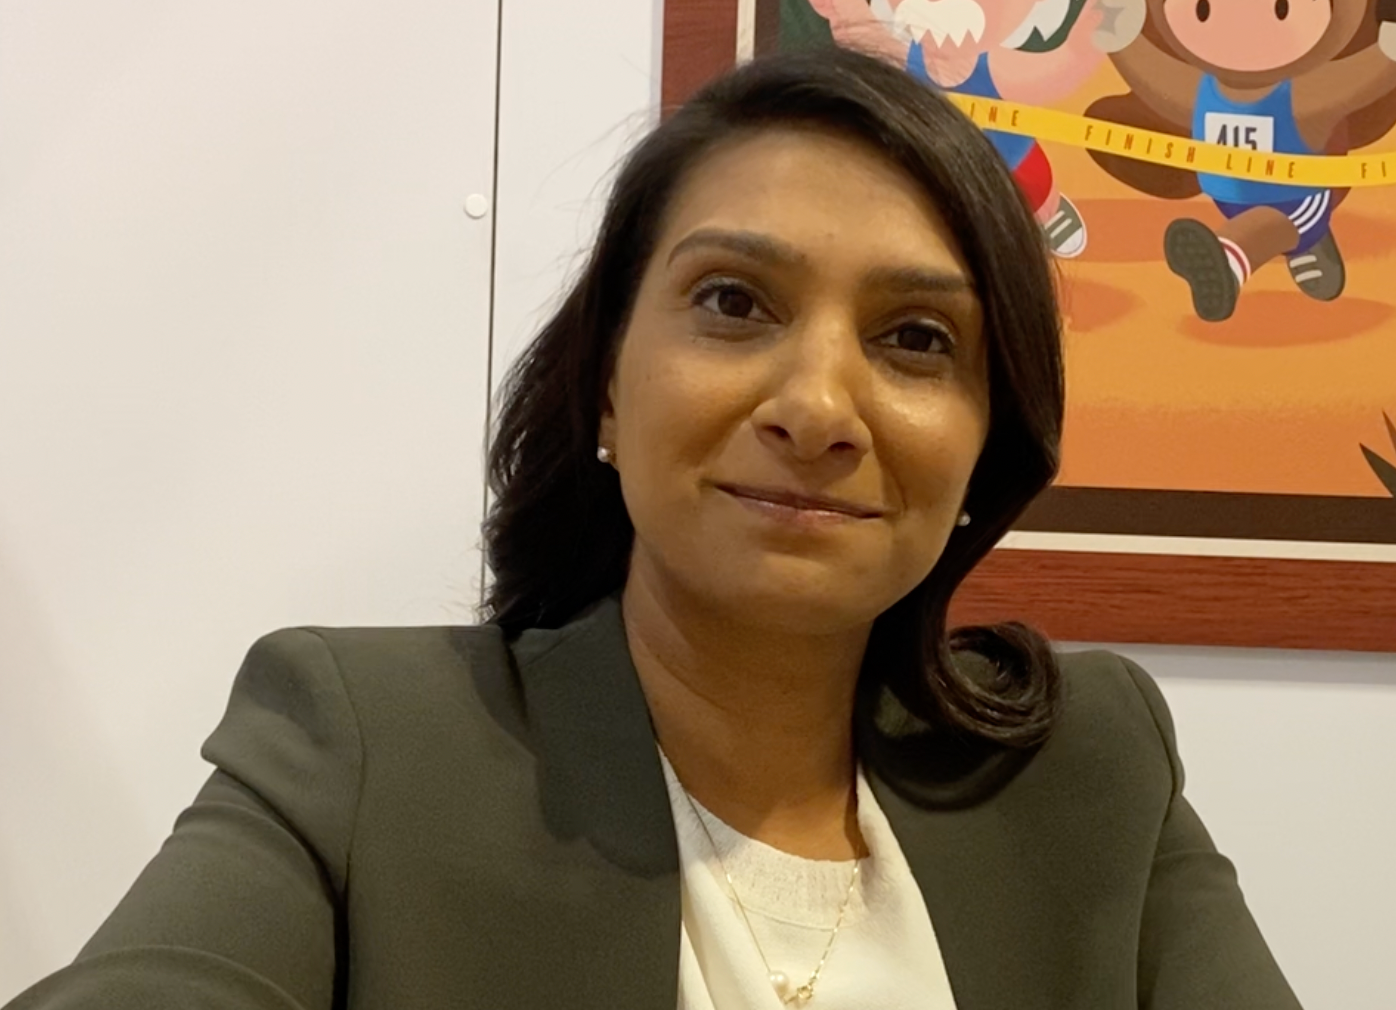 Fatima Paruk of Salesforce sees ‘huge opportunity’ for health equity